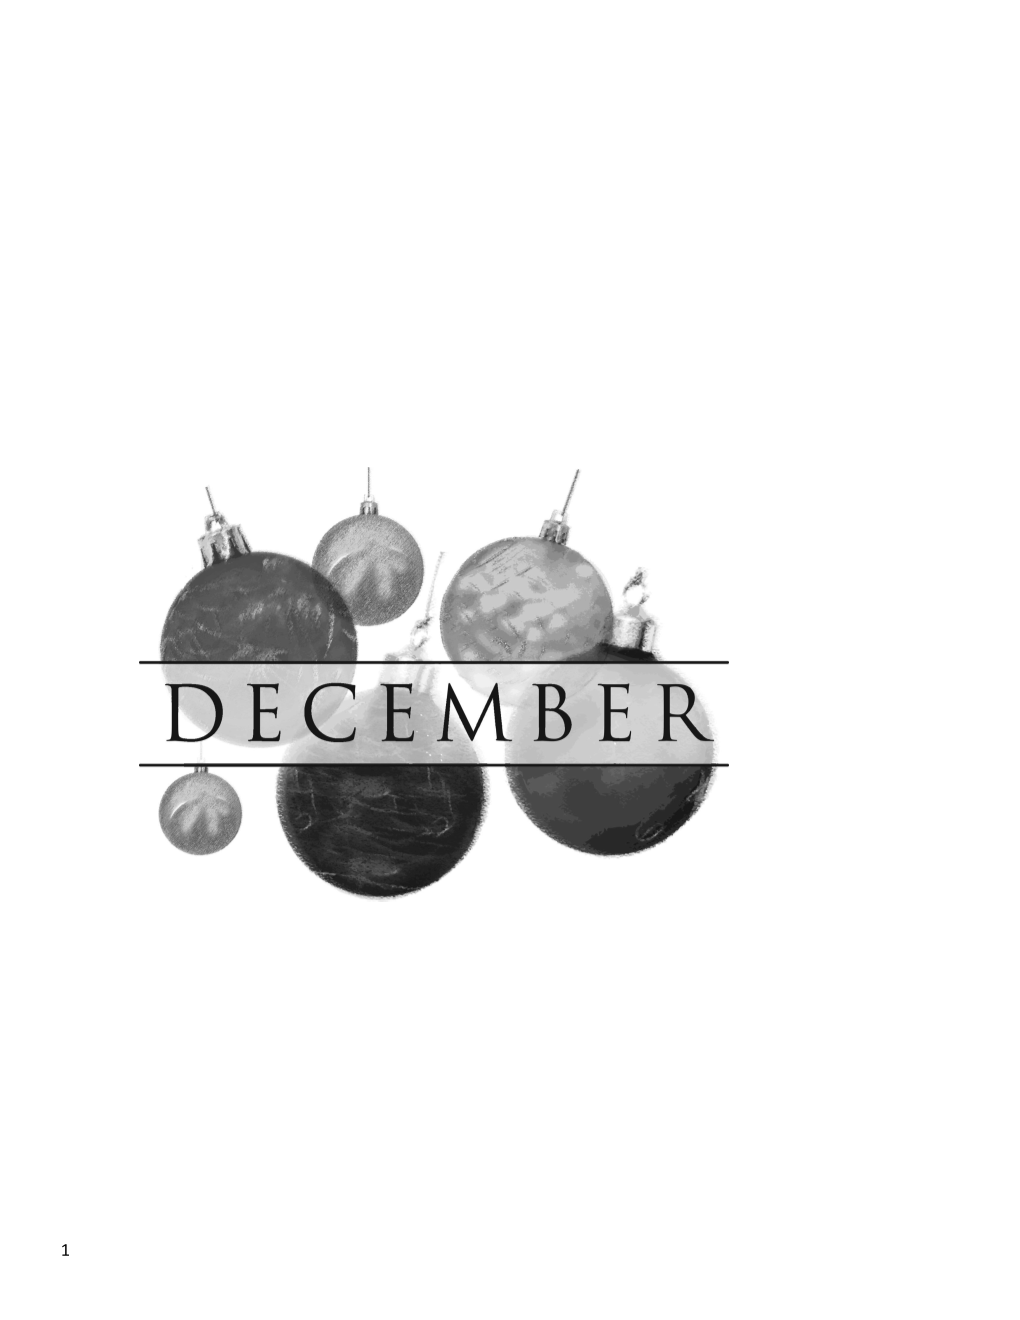 Expectant Greetings for December